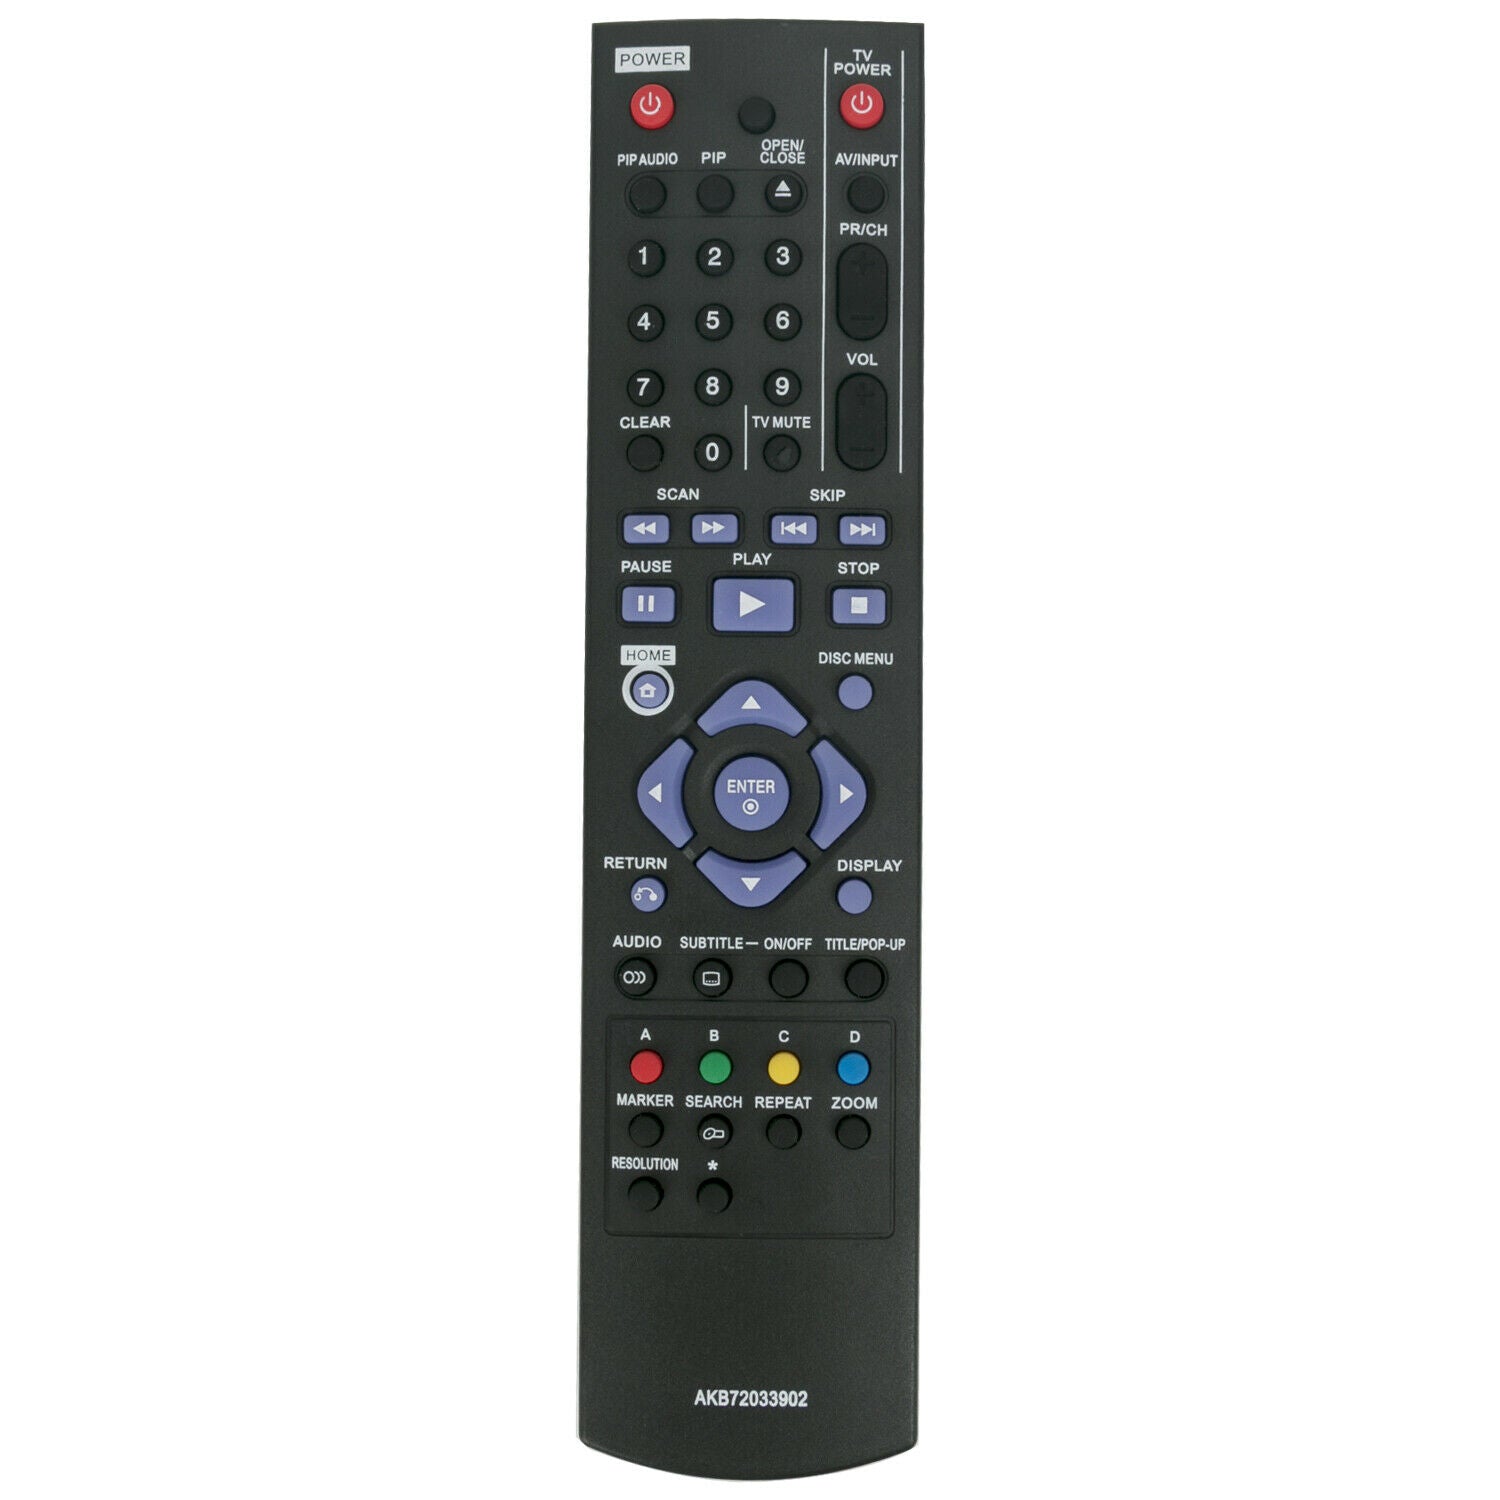 AKB72033902 Remote Replacement for LG DVD TV BD370